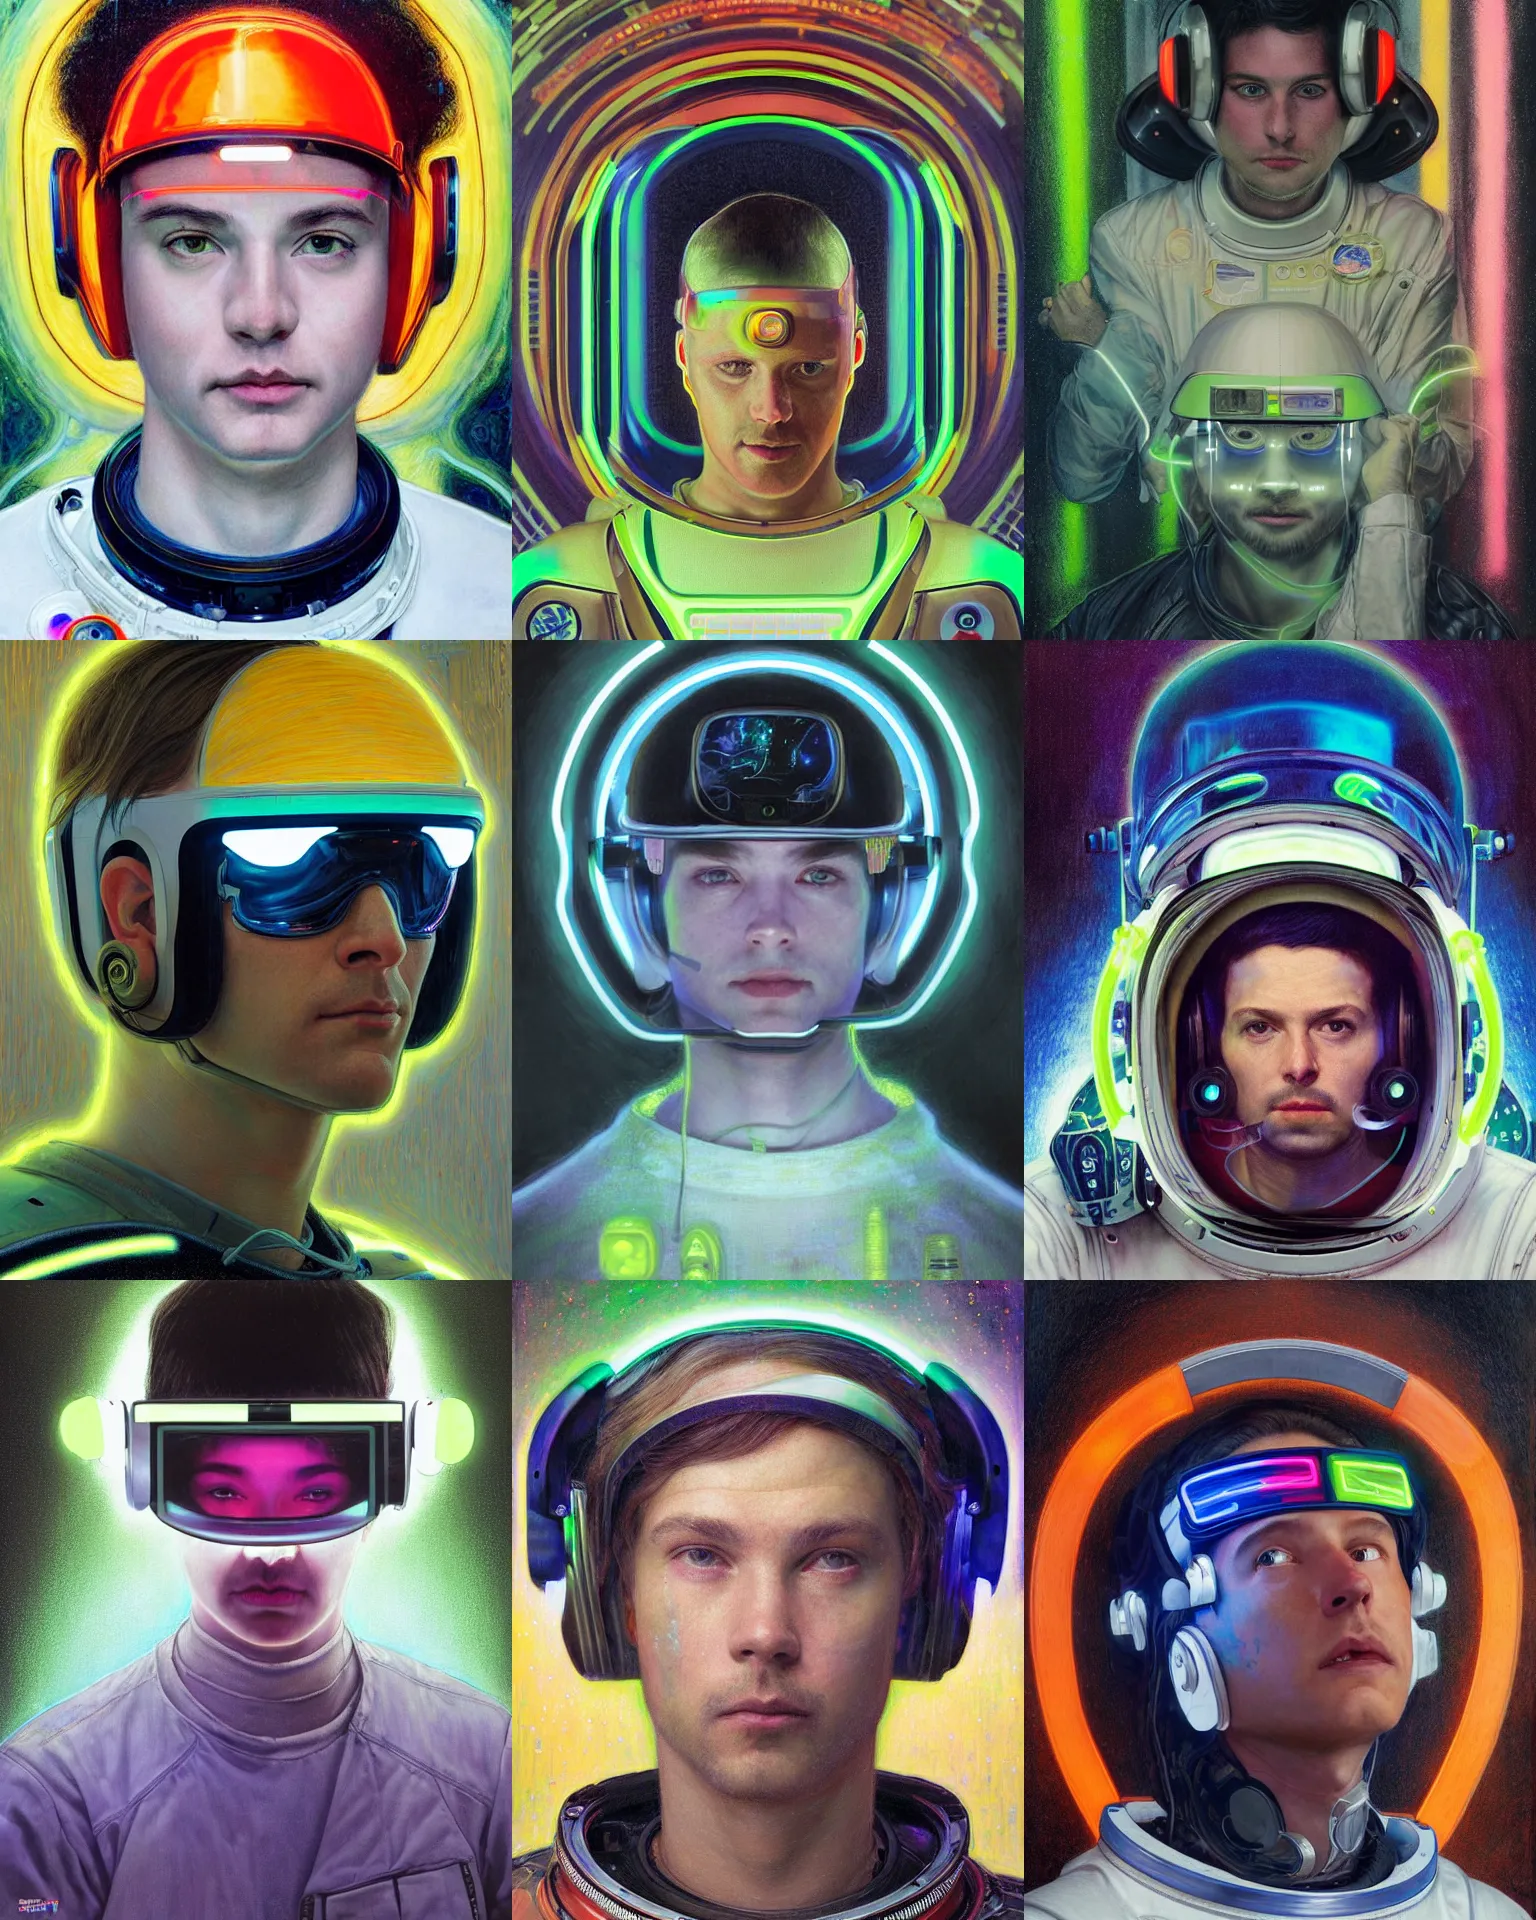 Prompt: future coder looking on, glowing visor over eyes with sleek neon headset, neon accents, desaturated headshot portrait painting by donato giancola, dean cornwall, gustav klimt, edmund dulac, alex grey, alphonse mucha, astronaut cyberpunk electric fashion photography white stubble 8 5 mm